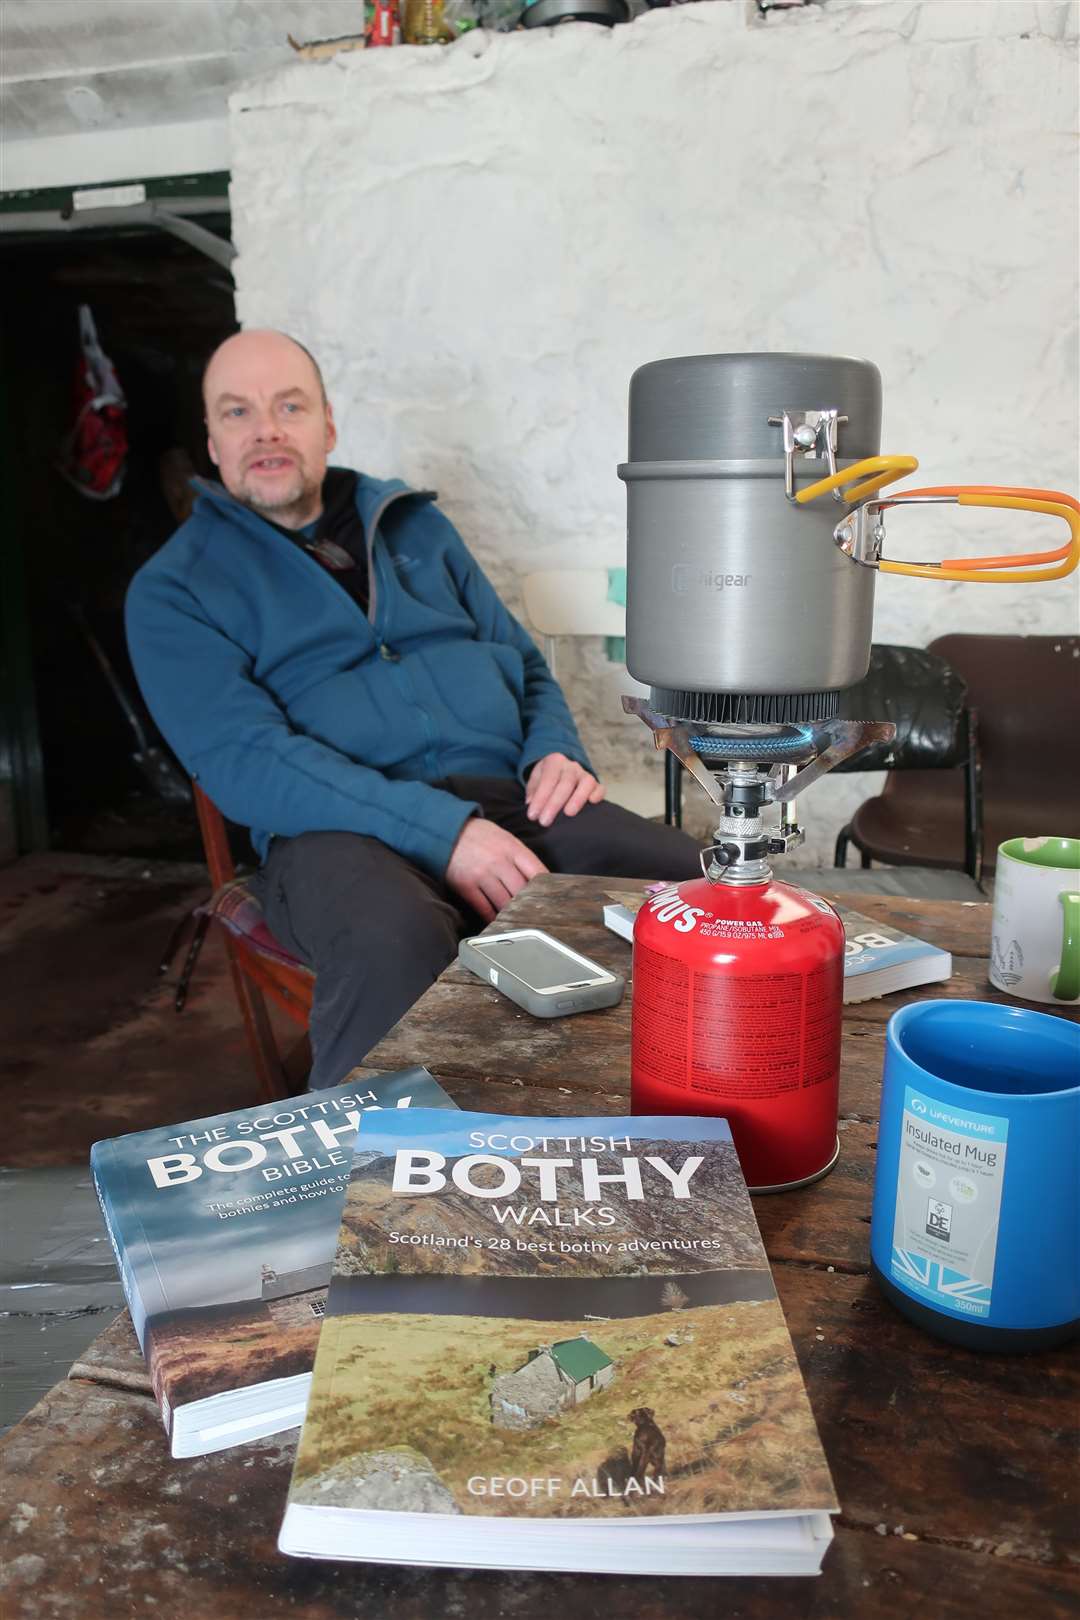 Geoff Allan in his natural habitat inside Ryvoan bothy - along with his two books on bothies.